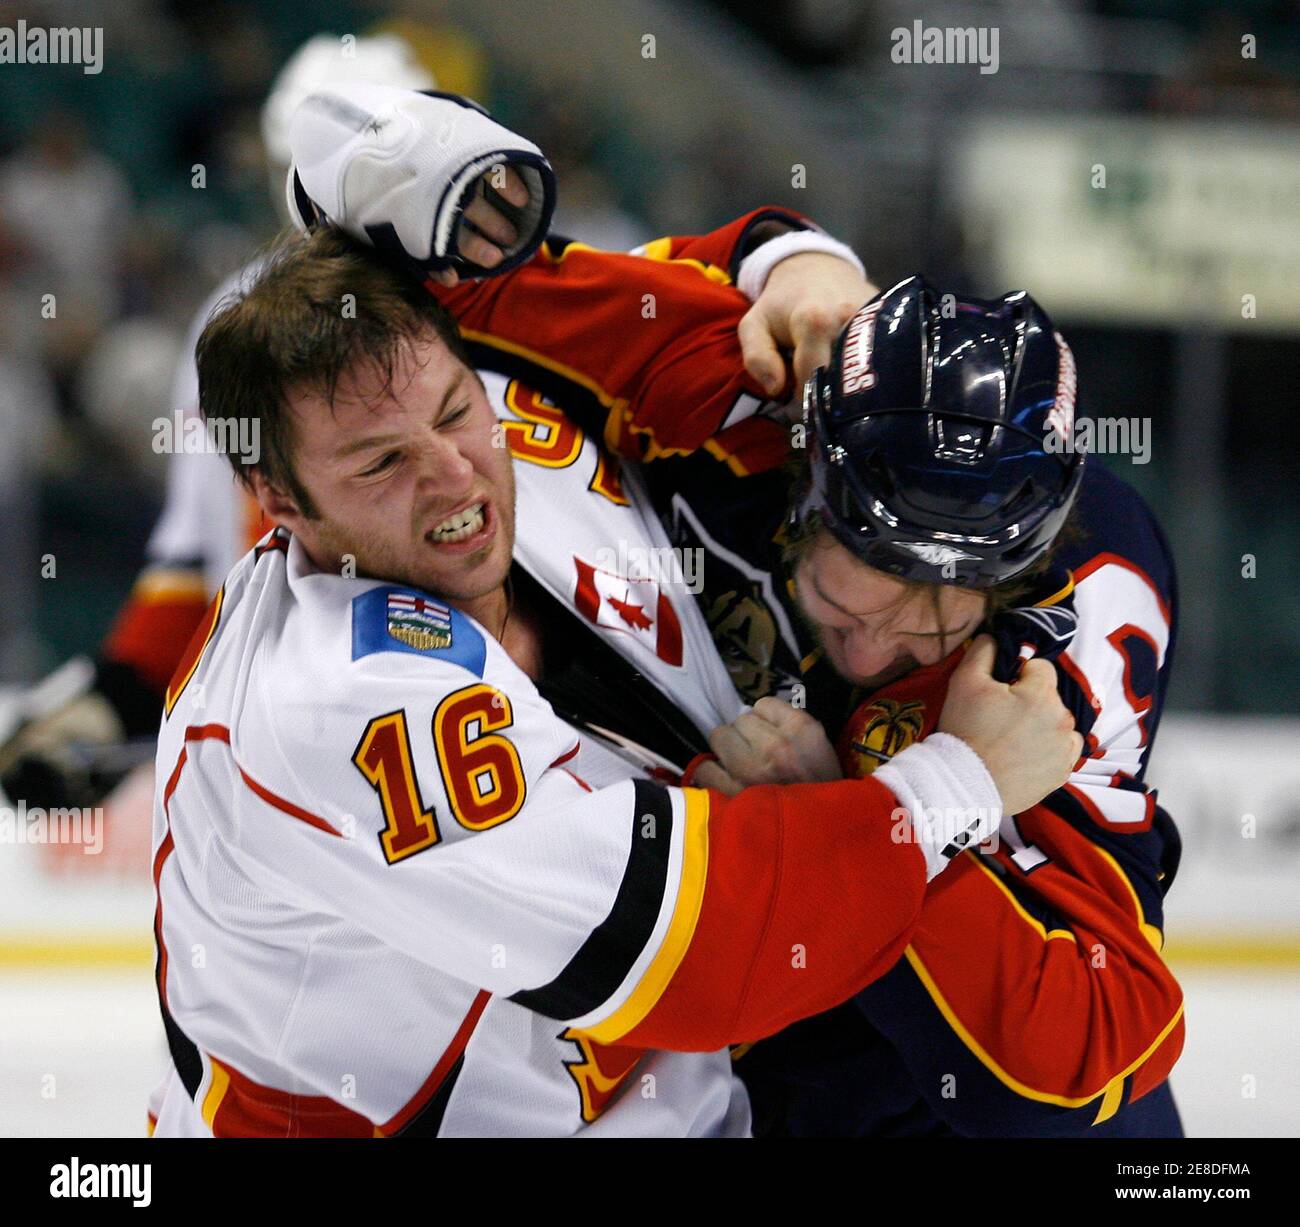 Calgary Flames Mark Smith (L) tangles with Florida Panthers Tanner Glass  during an altercation in first period NHL ice hockey action in Sunrise, Florida December 11, 2007.  REUTERS/Hans Deryk  (UNITED STATES) Stock Photo